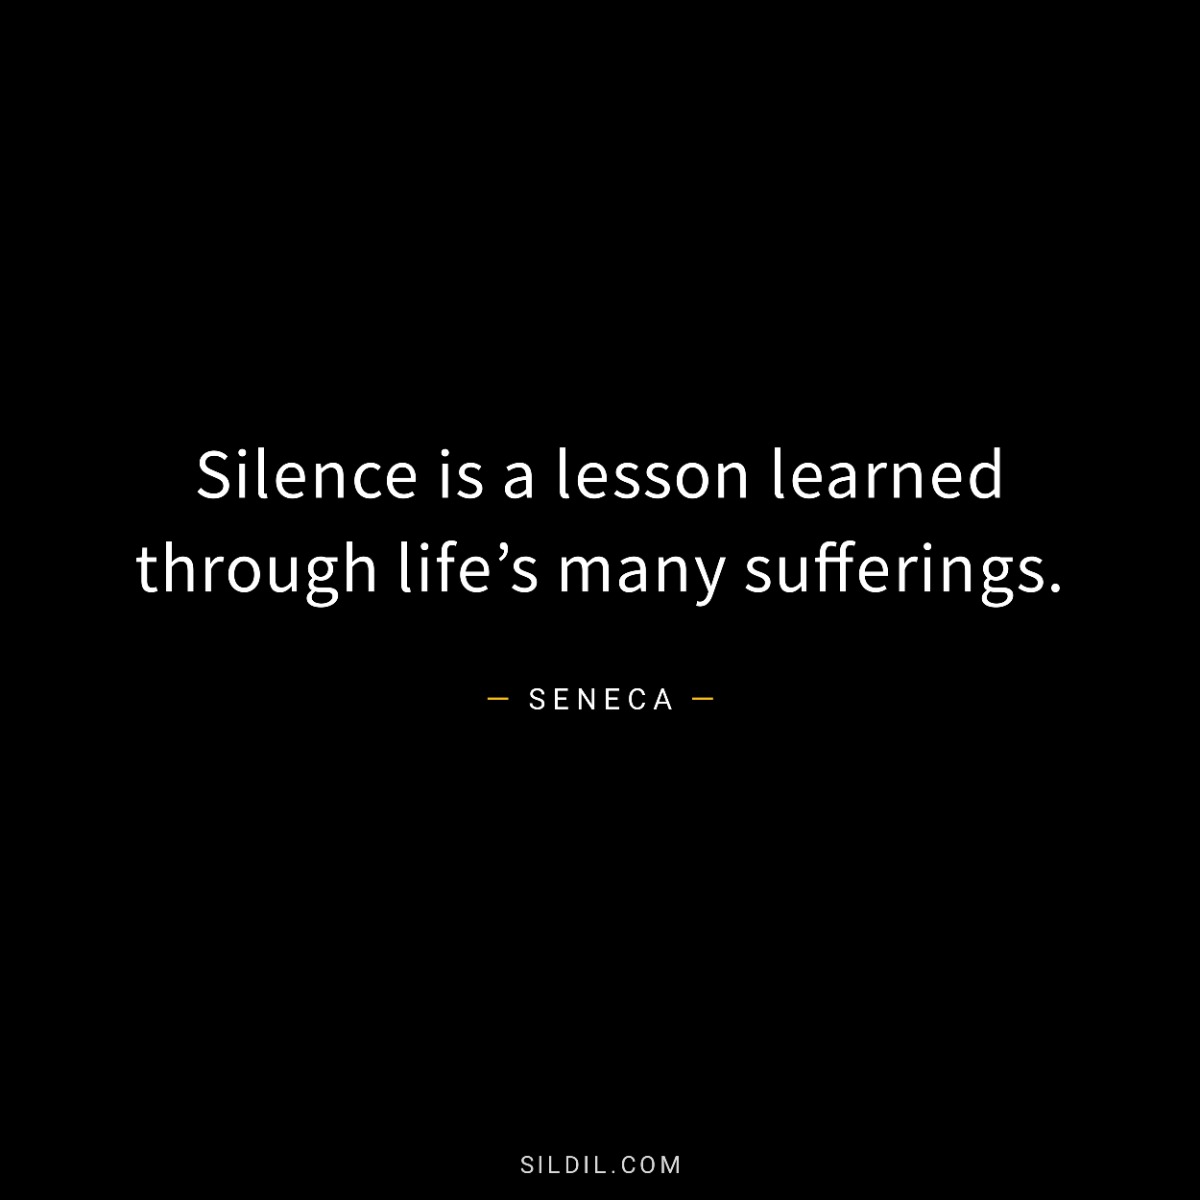 Silence is a lesson learned through life’s many sufferings.